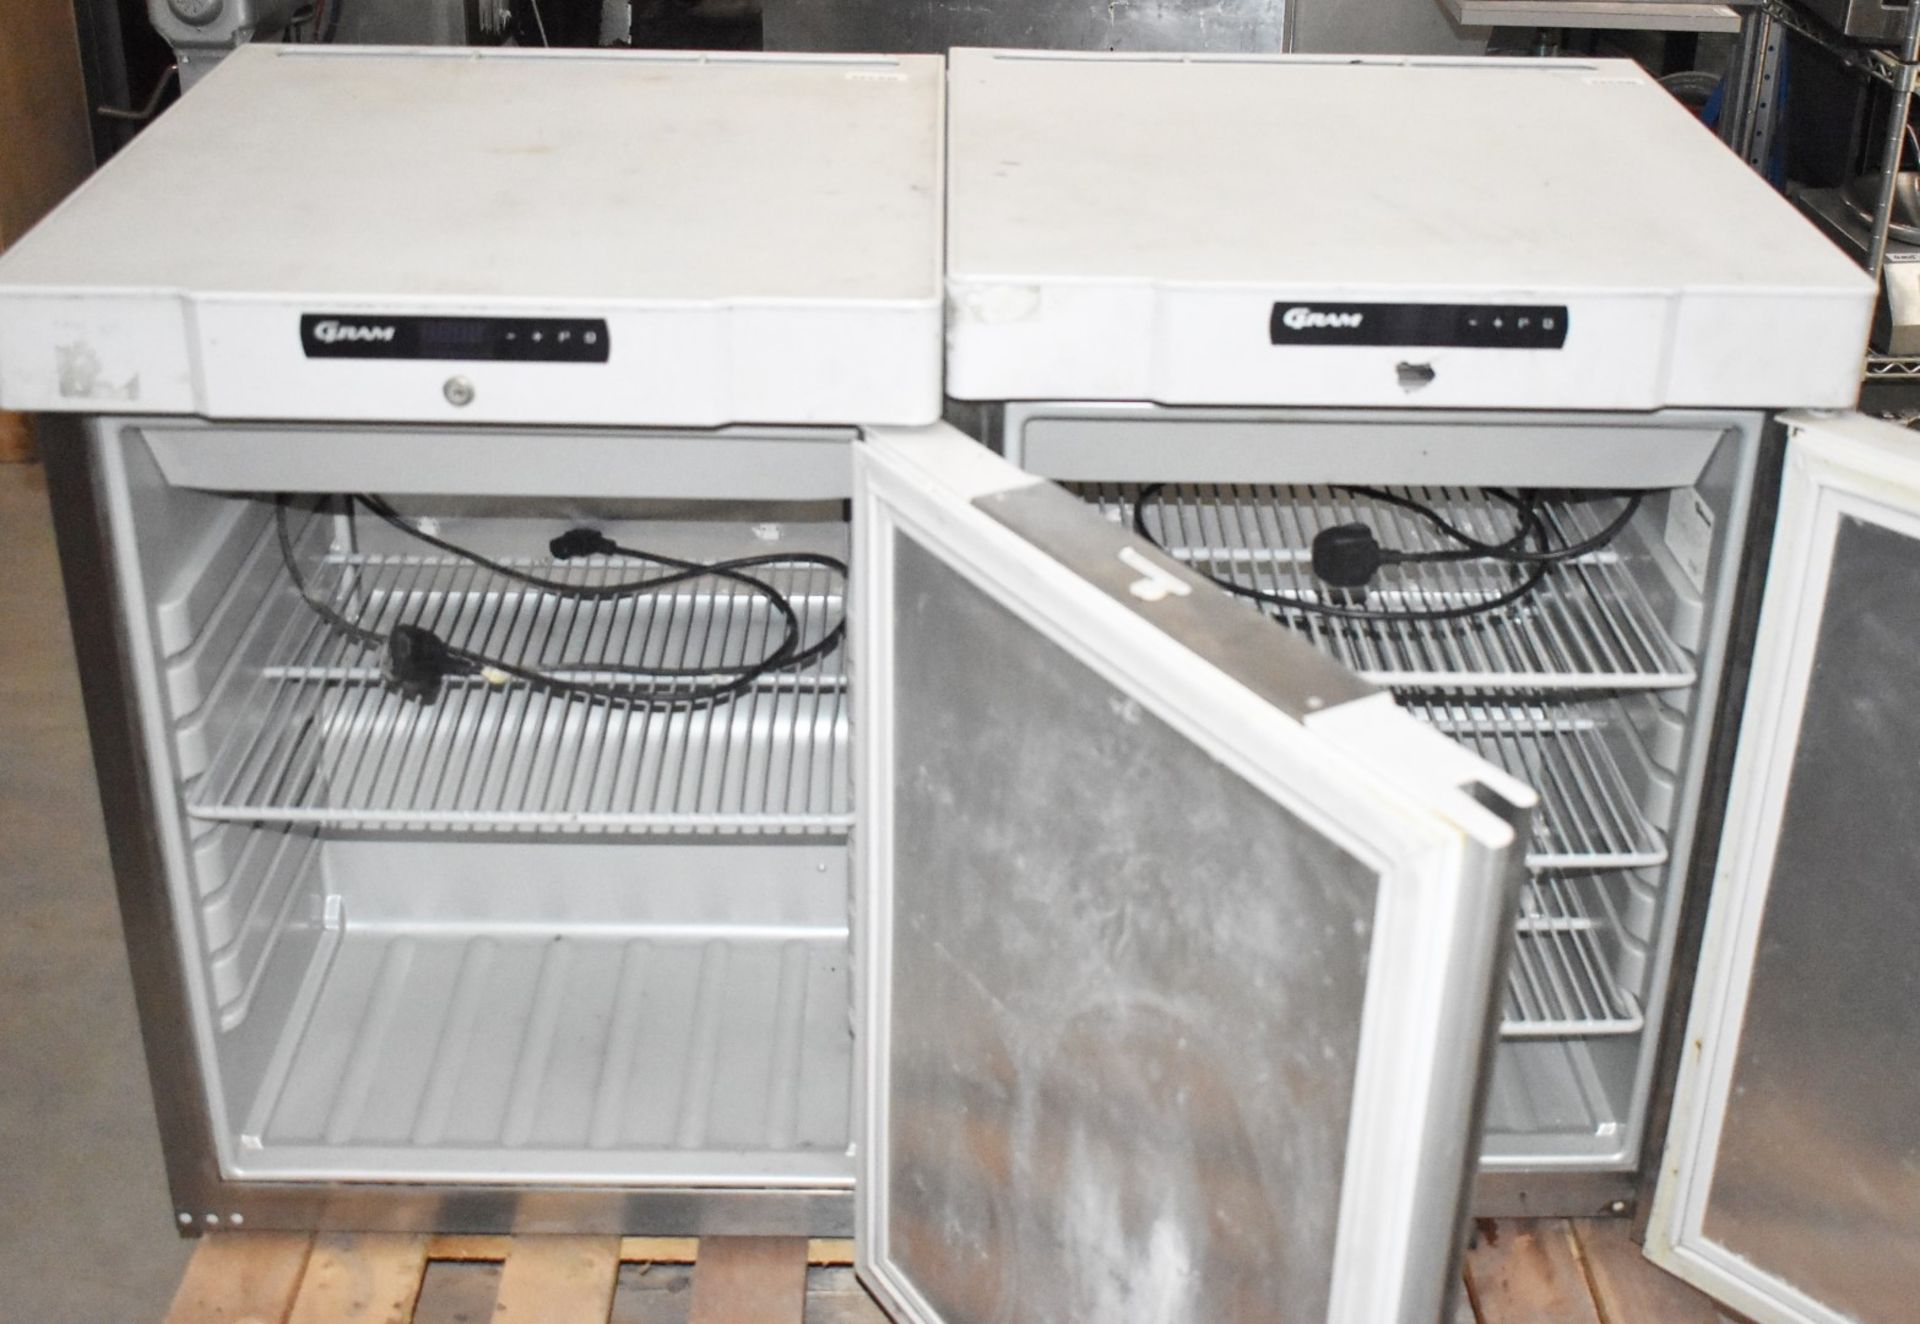 2 x Gram F 210 RG 3N 125 Ltr Undercounter Freezers - Recently Removed From a Restaurant - Image 7 of 8